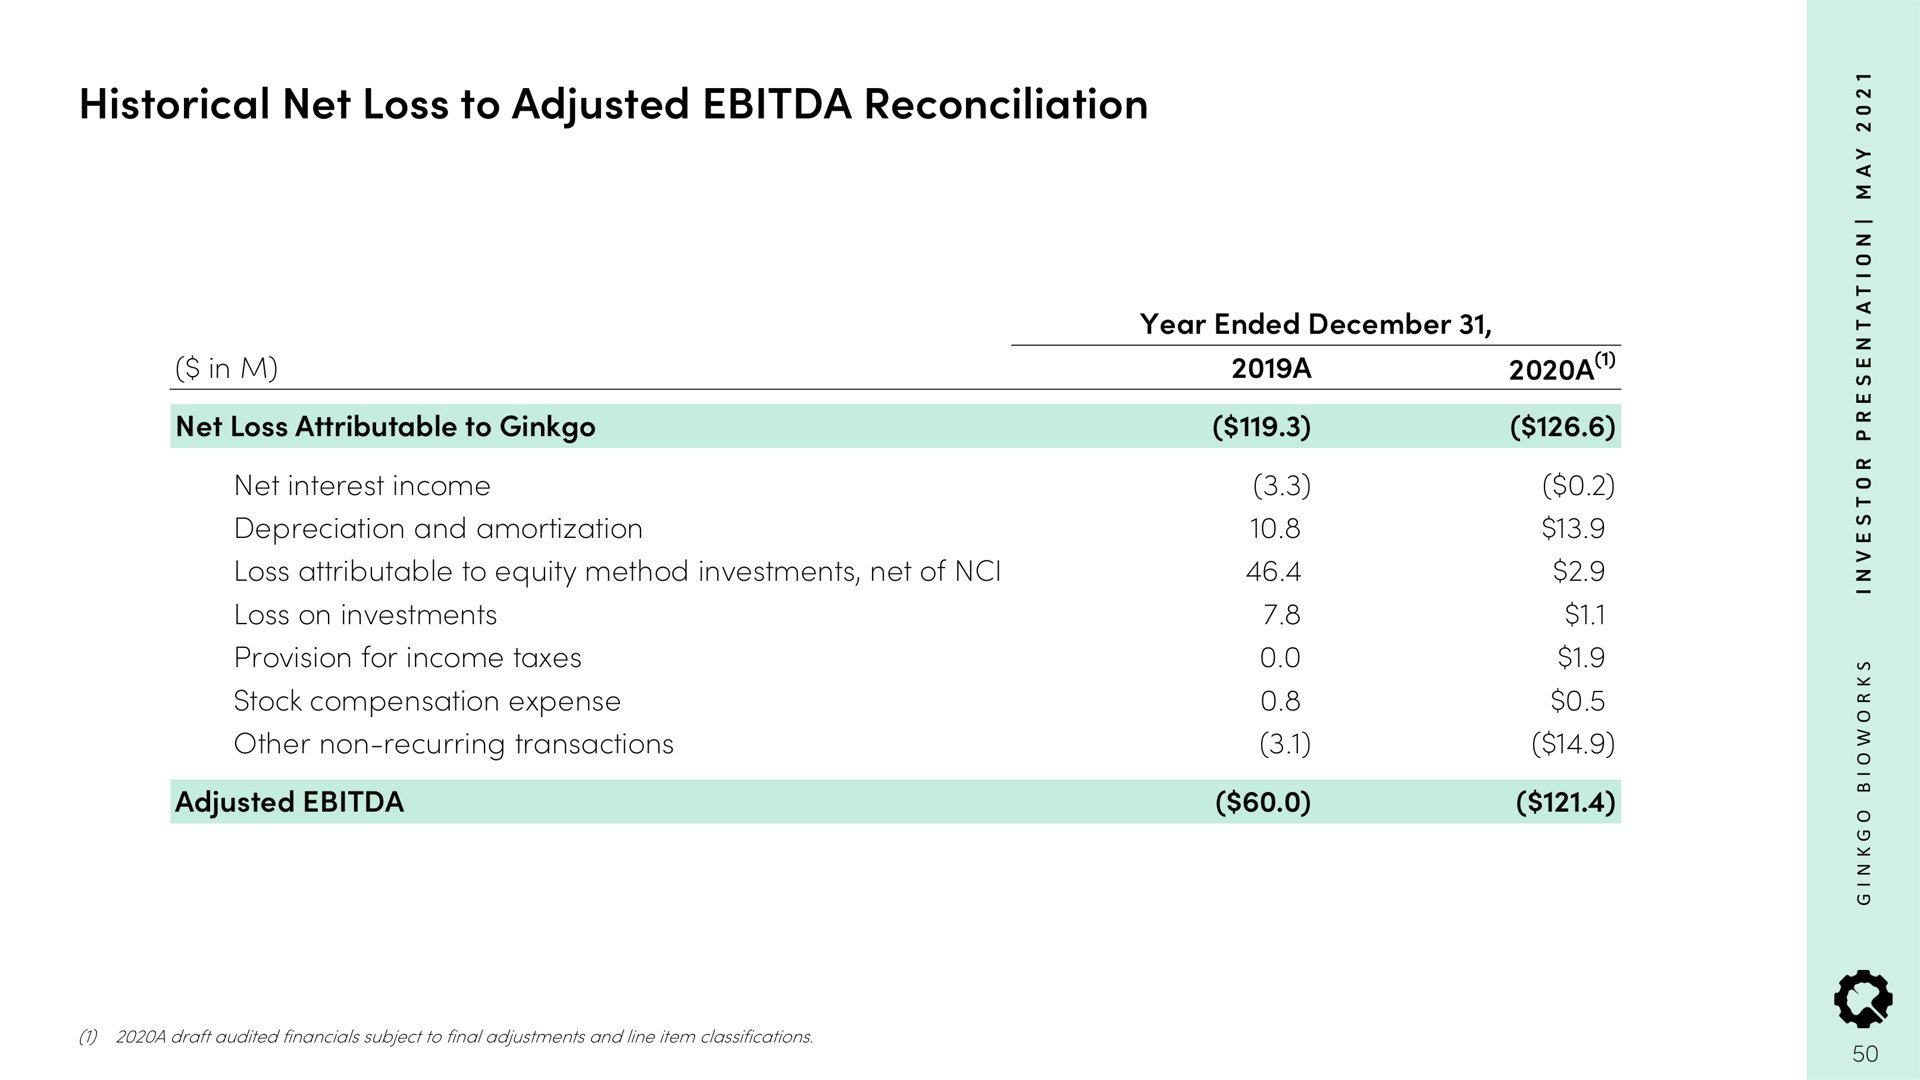 historical net loss to adjusted reconciliation | Ginkgo